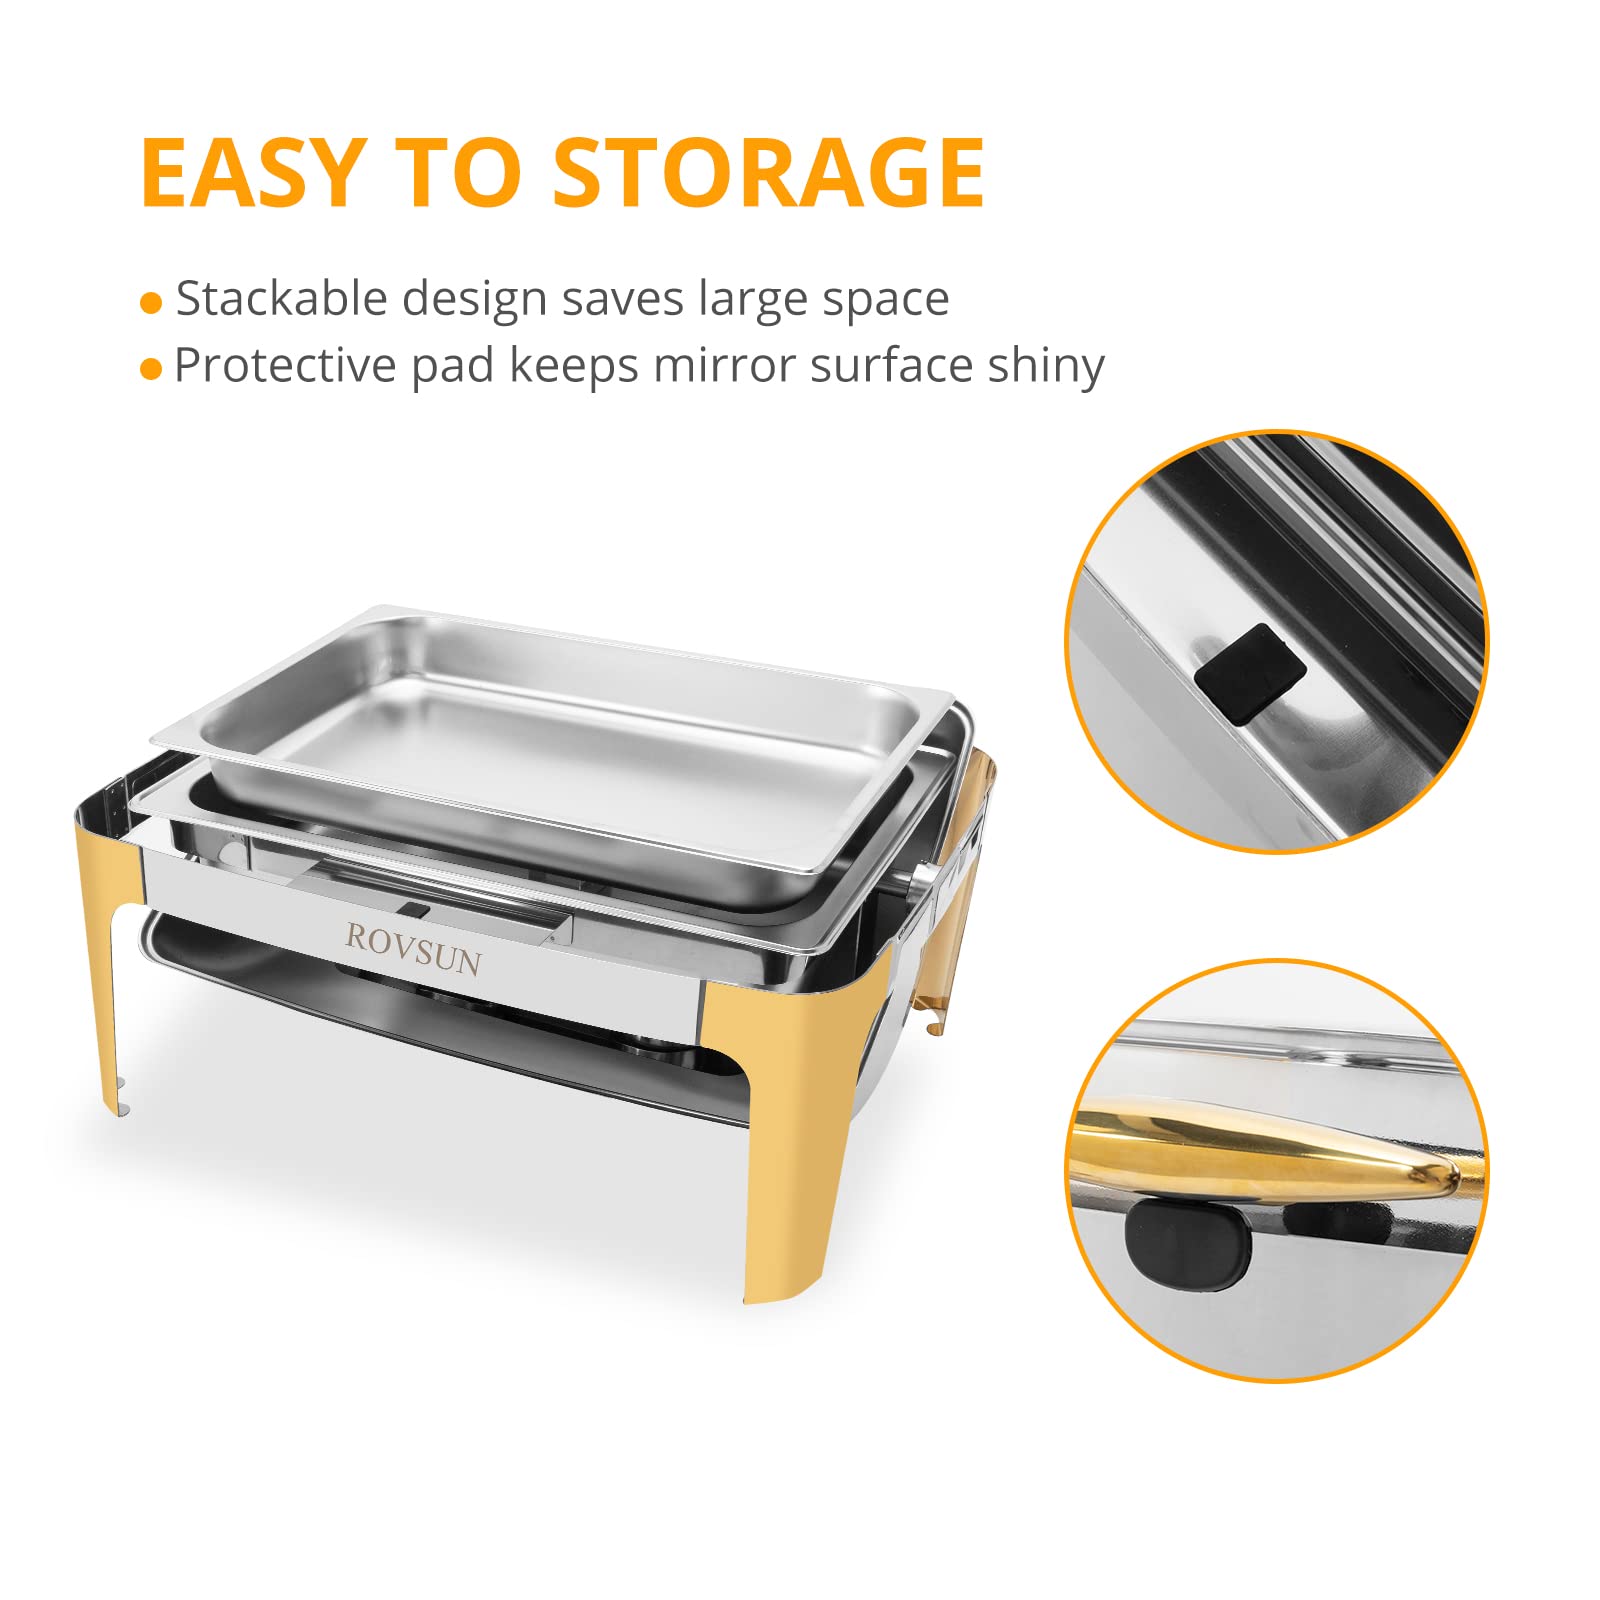 ROVSUN 2 Packs Roll Top Chafing Dish Buffet Set Gold Accent, NSF 9 Quart Rectangular Stainless Steel Chafer, Buffet Servers and Warmers Set Warming Tray for Wedding, Parties, Banquet, Catering Events